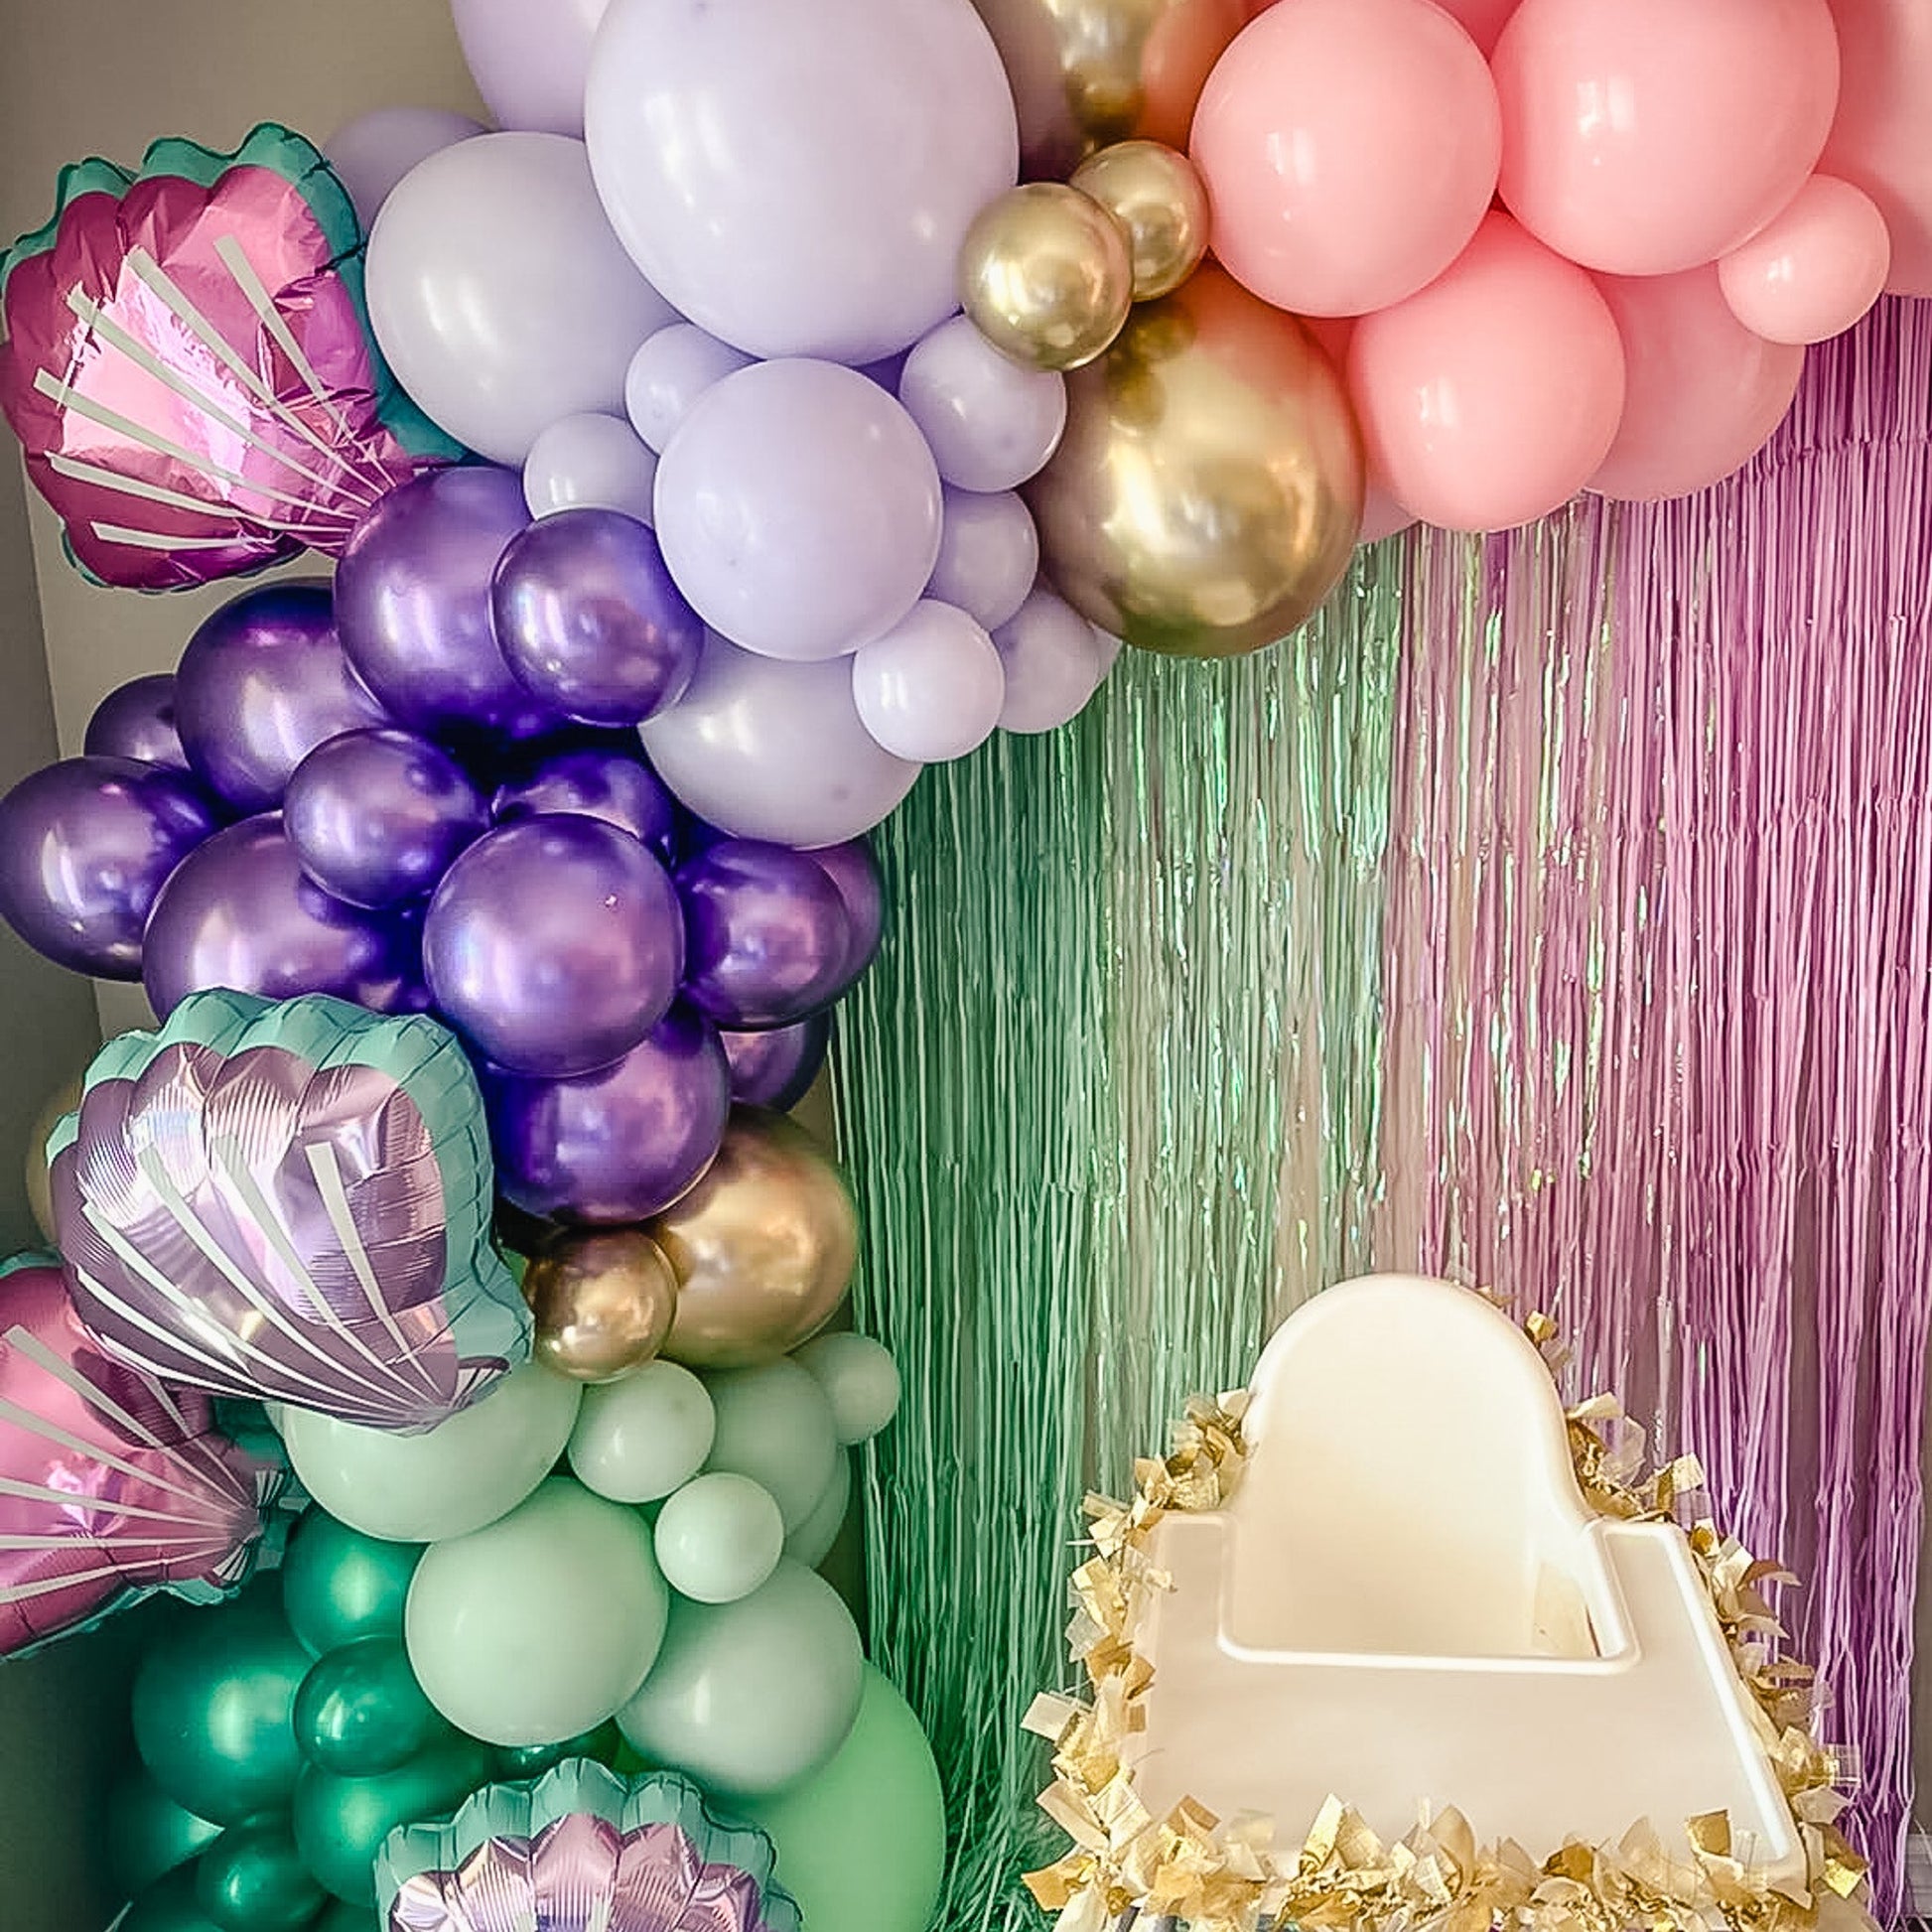 Purple Seashell Mylar Balloons - Sea Shell Foil Balloon (19 inches) - Ellie's Party Supply